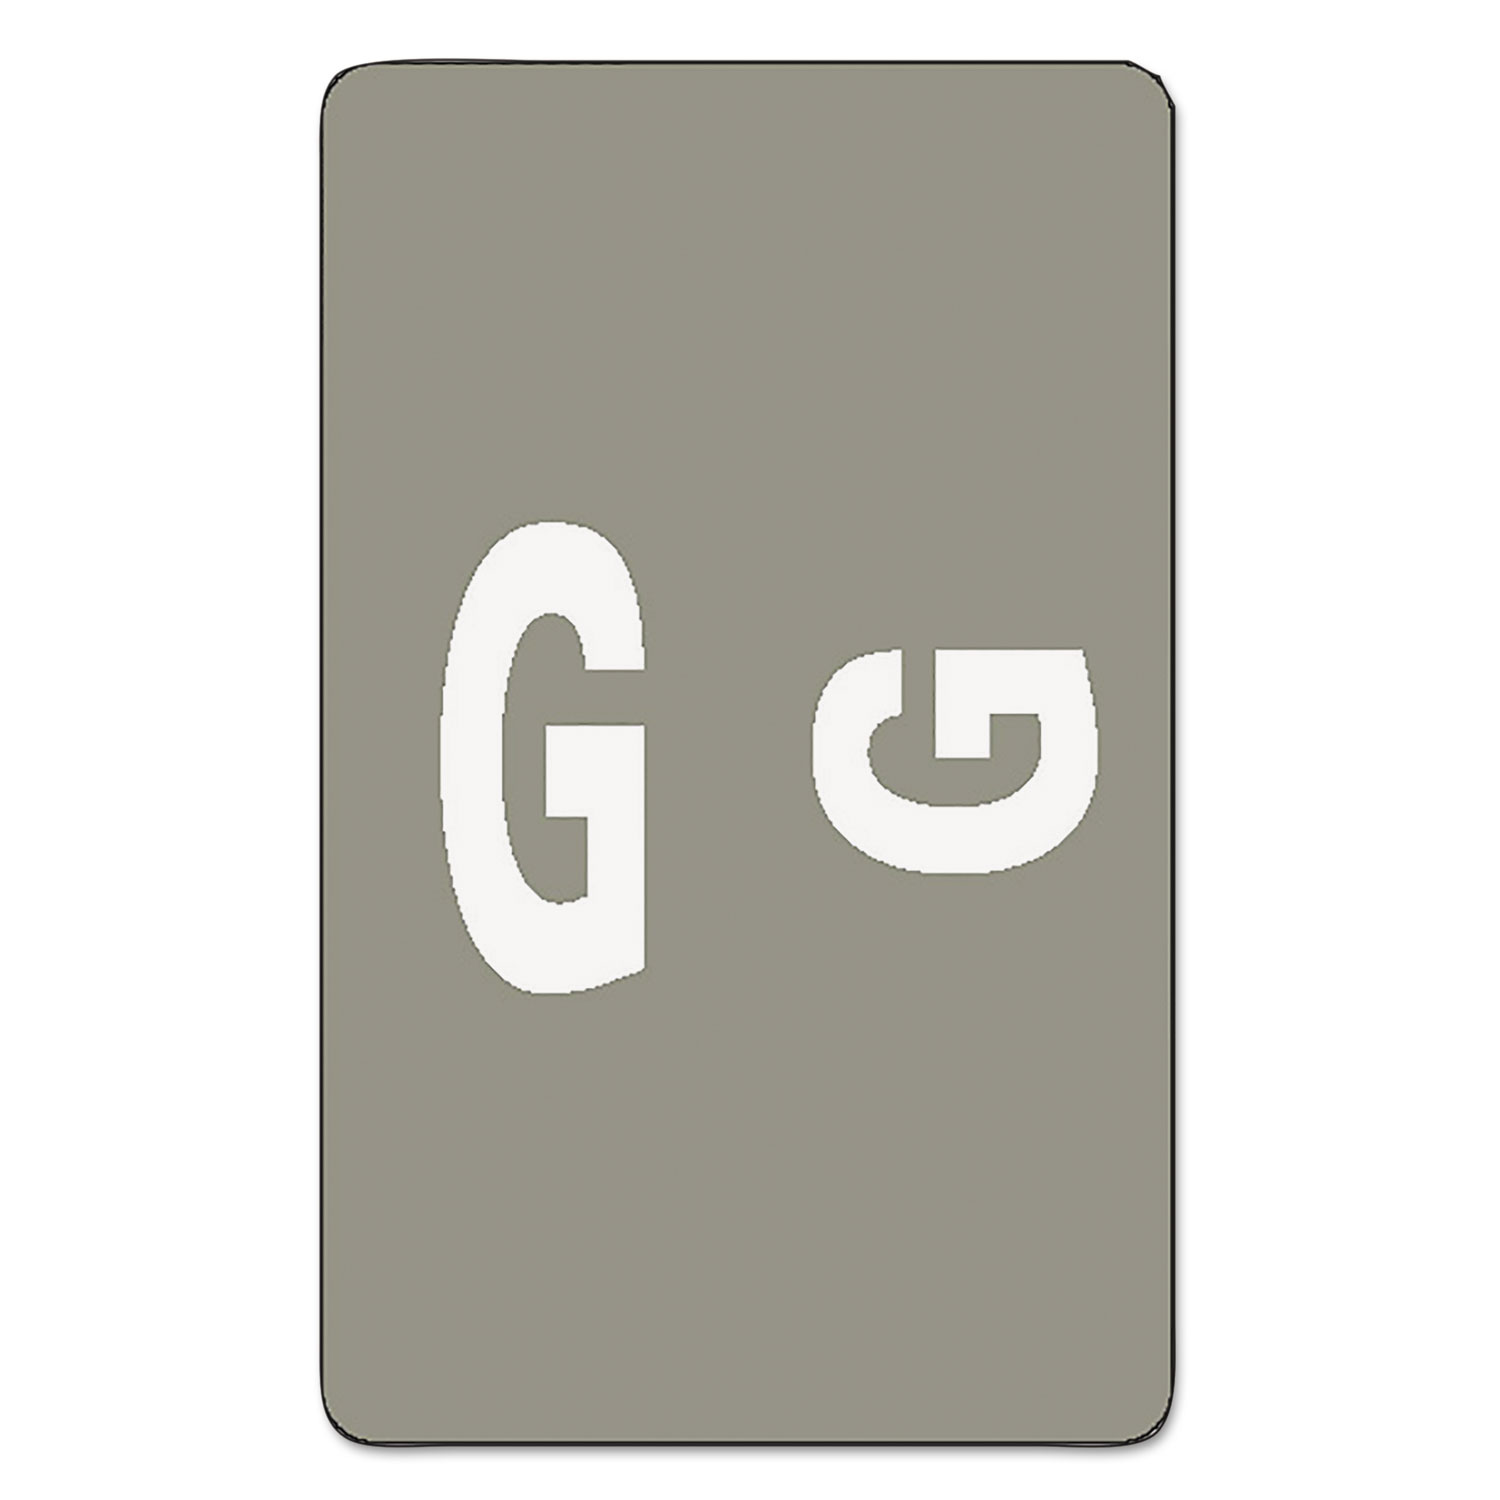  Smead 67177 AlphaZ Color-Coded Second Letter Alphabetical Labels, G, 1 x 1.63, Gray, 10/Sheet, 10 Sheets/Pack (SMD67177) 